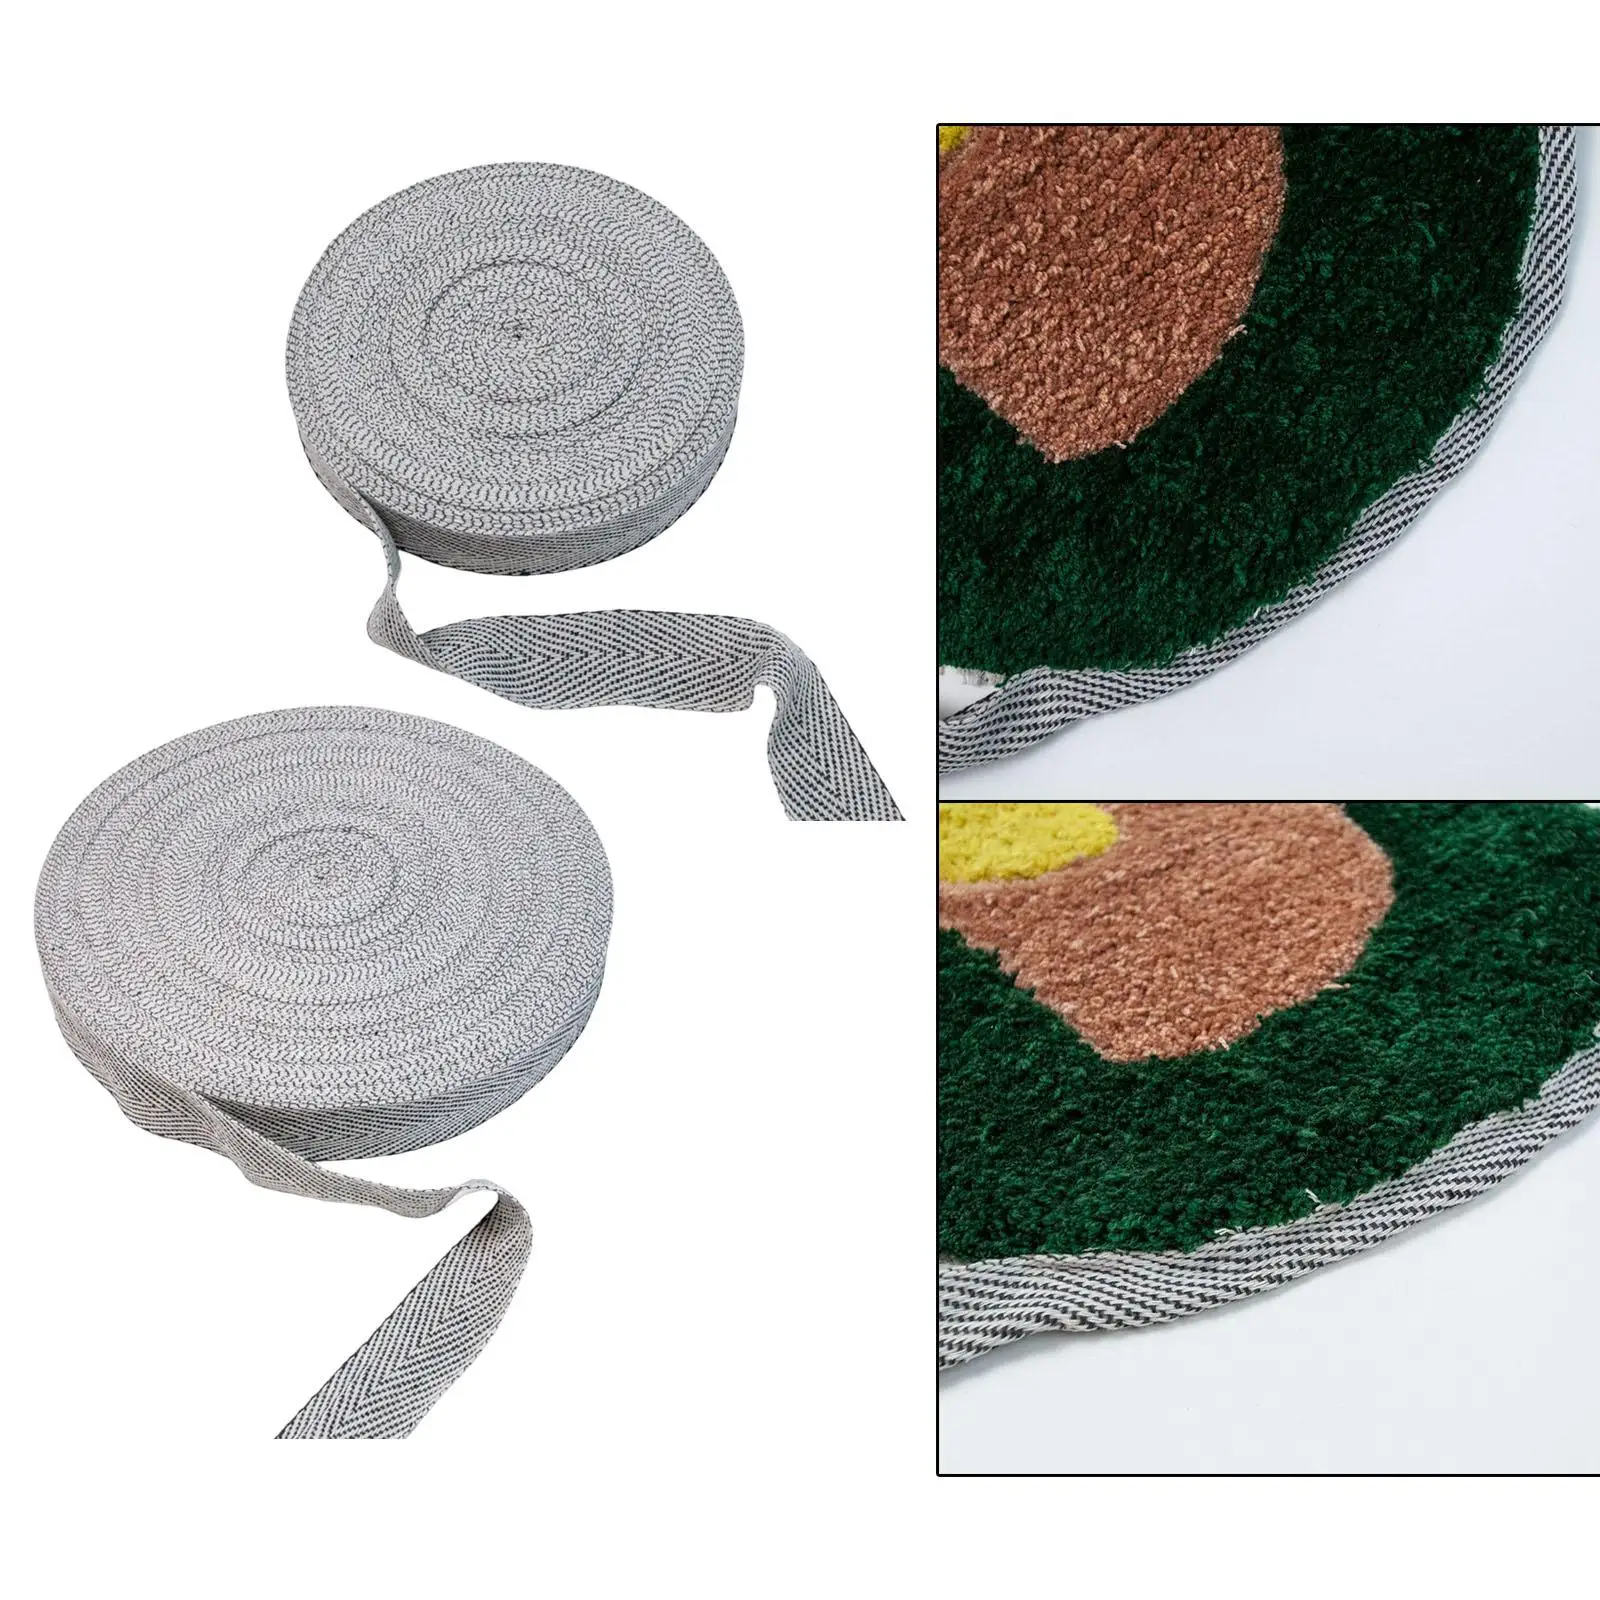 Carpet Edging with Cloth Belt Anti Skid for Gift Wrapping Floral Arrangement